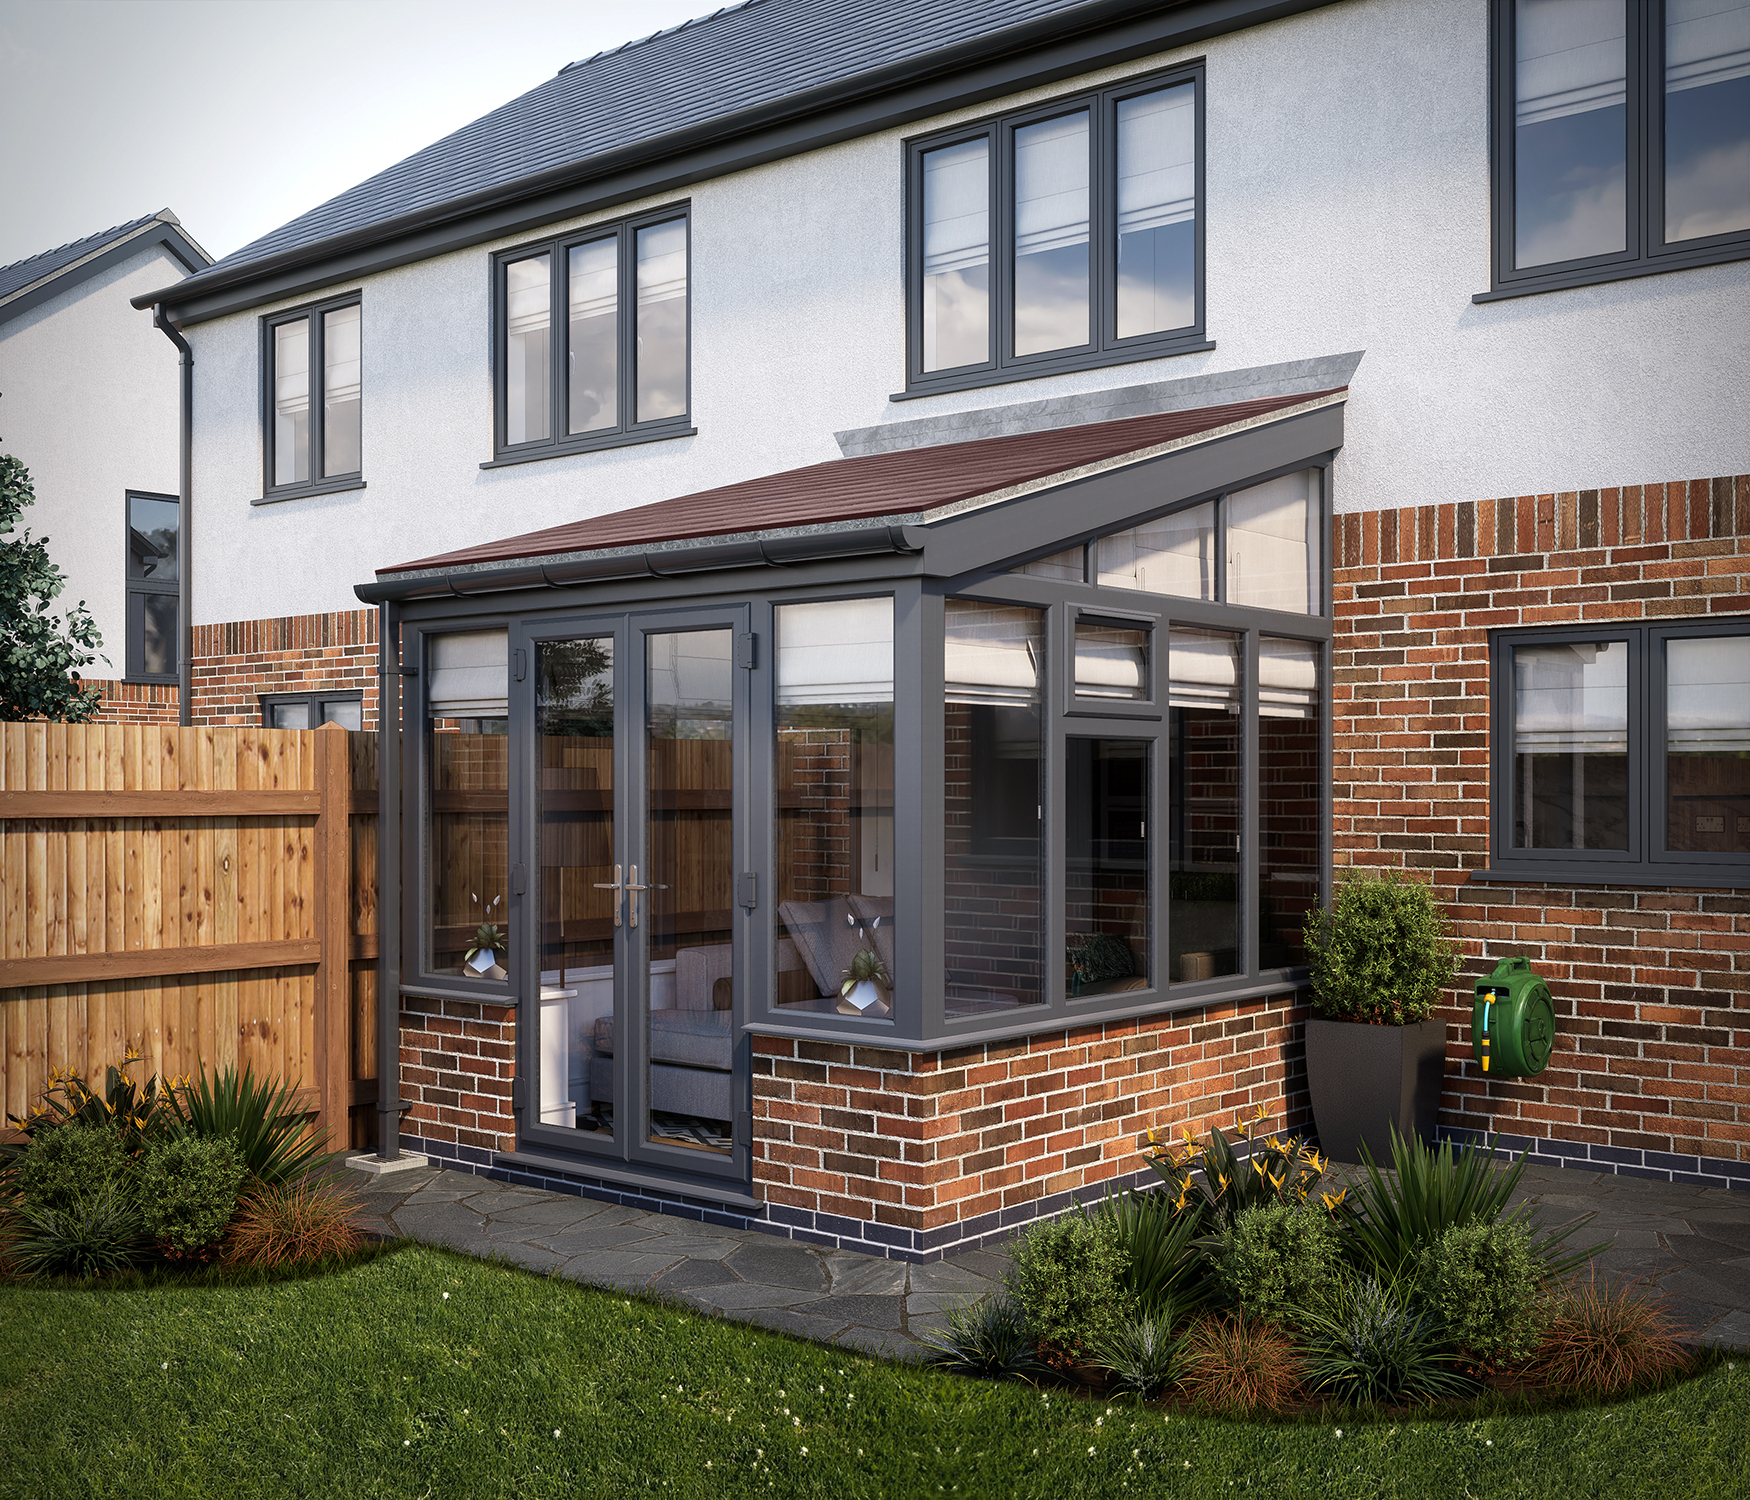 Image of SOLid Roof Lean to Conservatory Grey Frames Dwarf Wall with Rustic Brown Tiles - 10 x 10ft